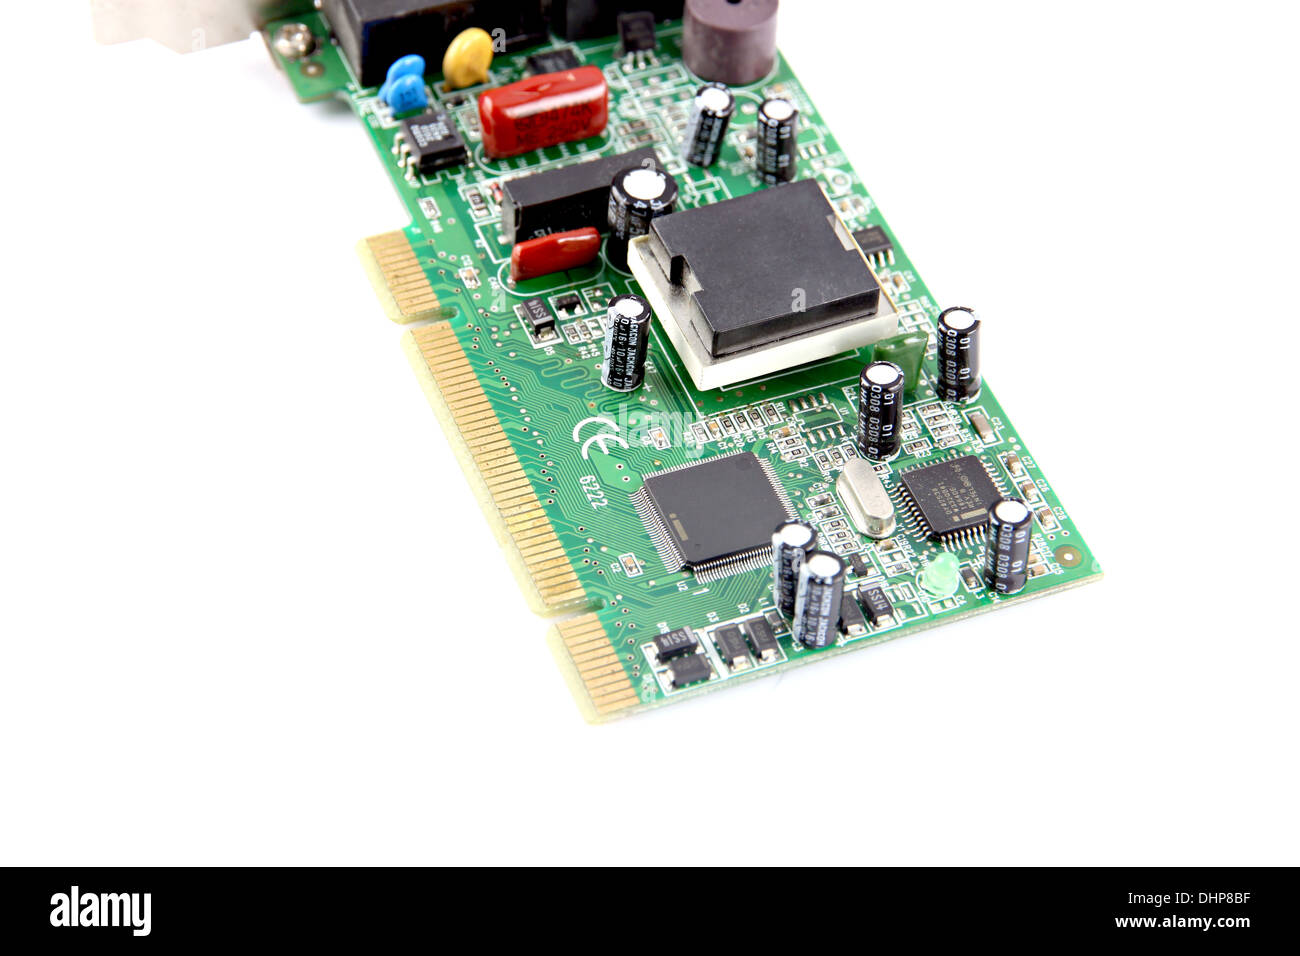 The modem Computer equipment circuit board on white background. Stock Photo